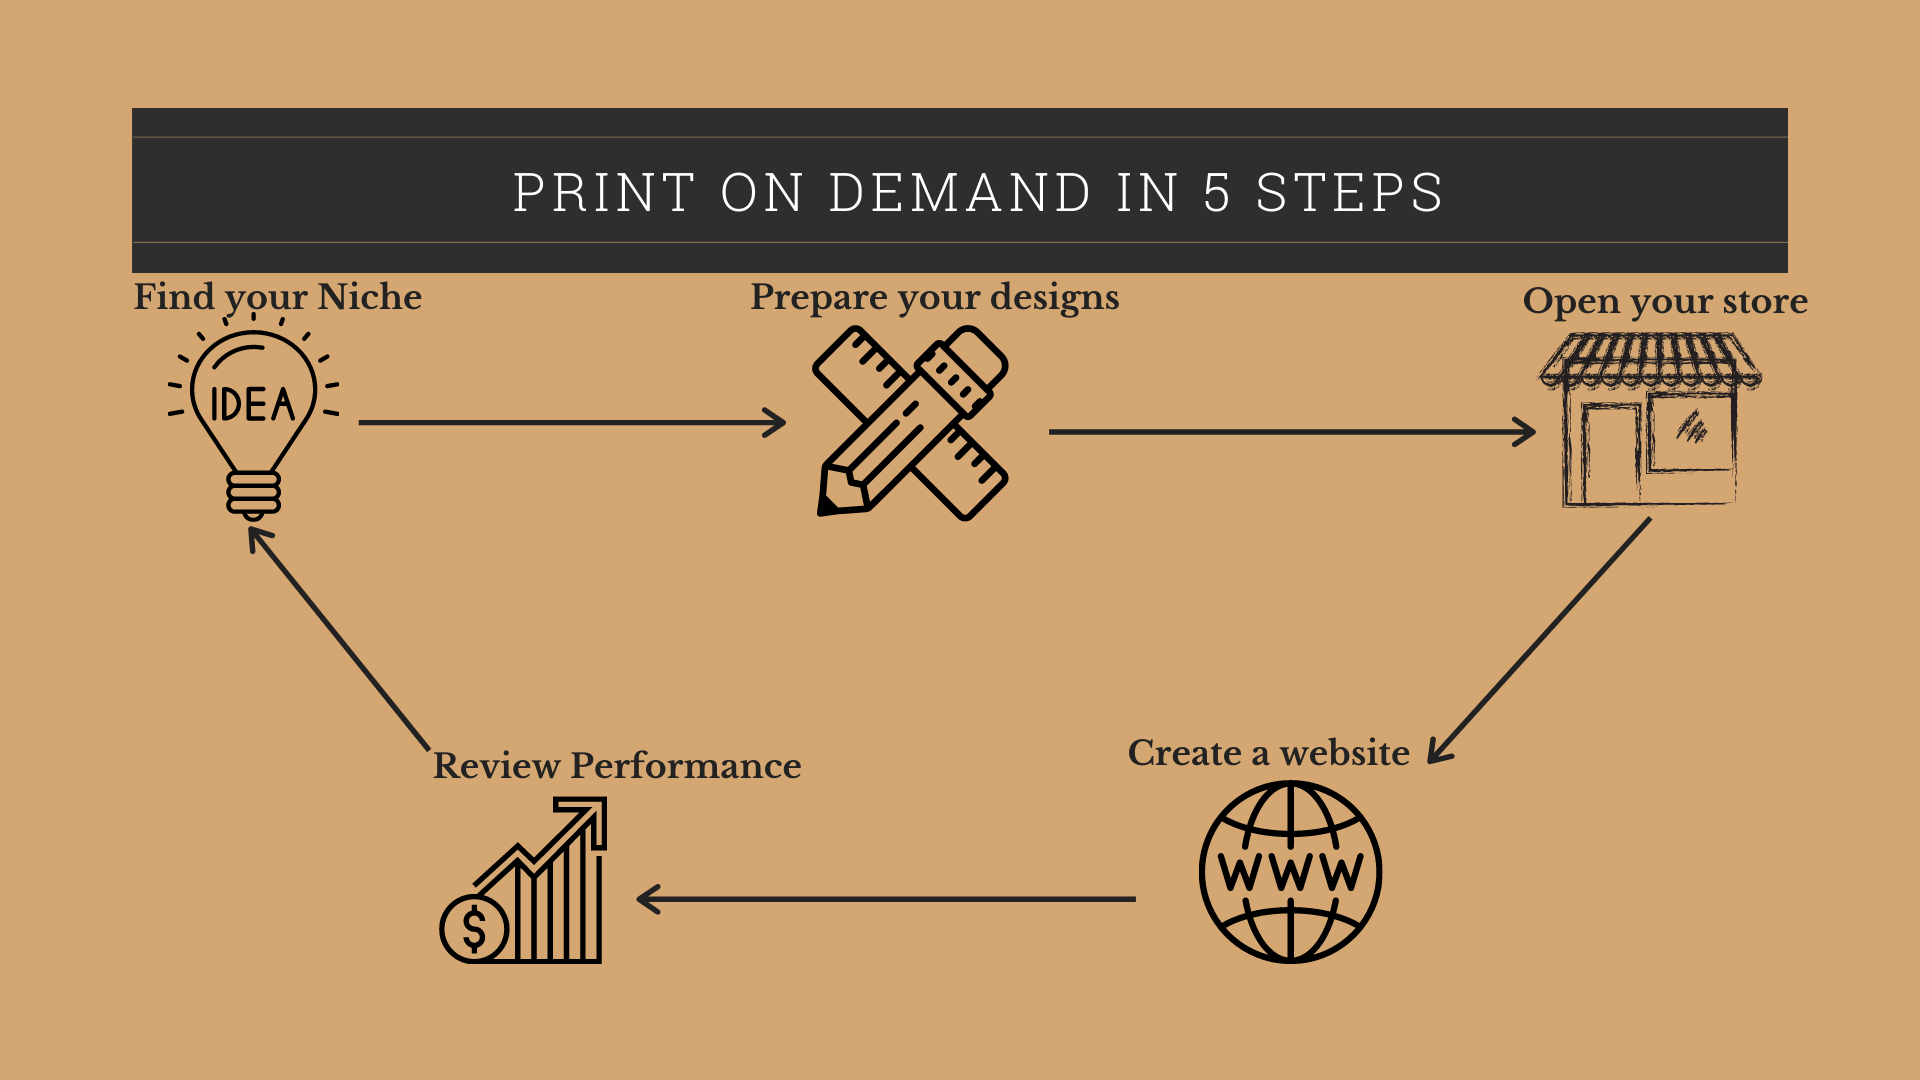 Print on demand business in 5 steps